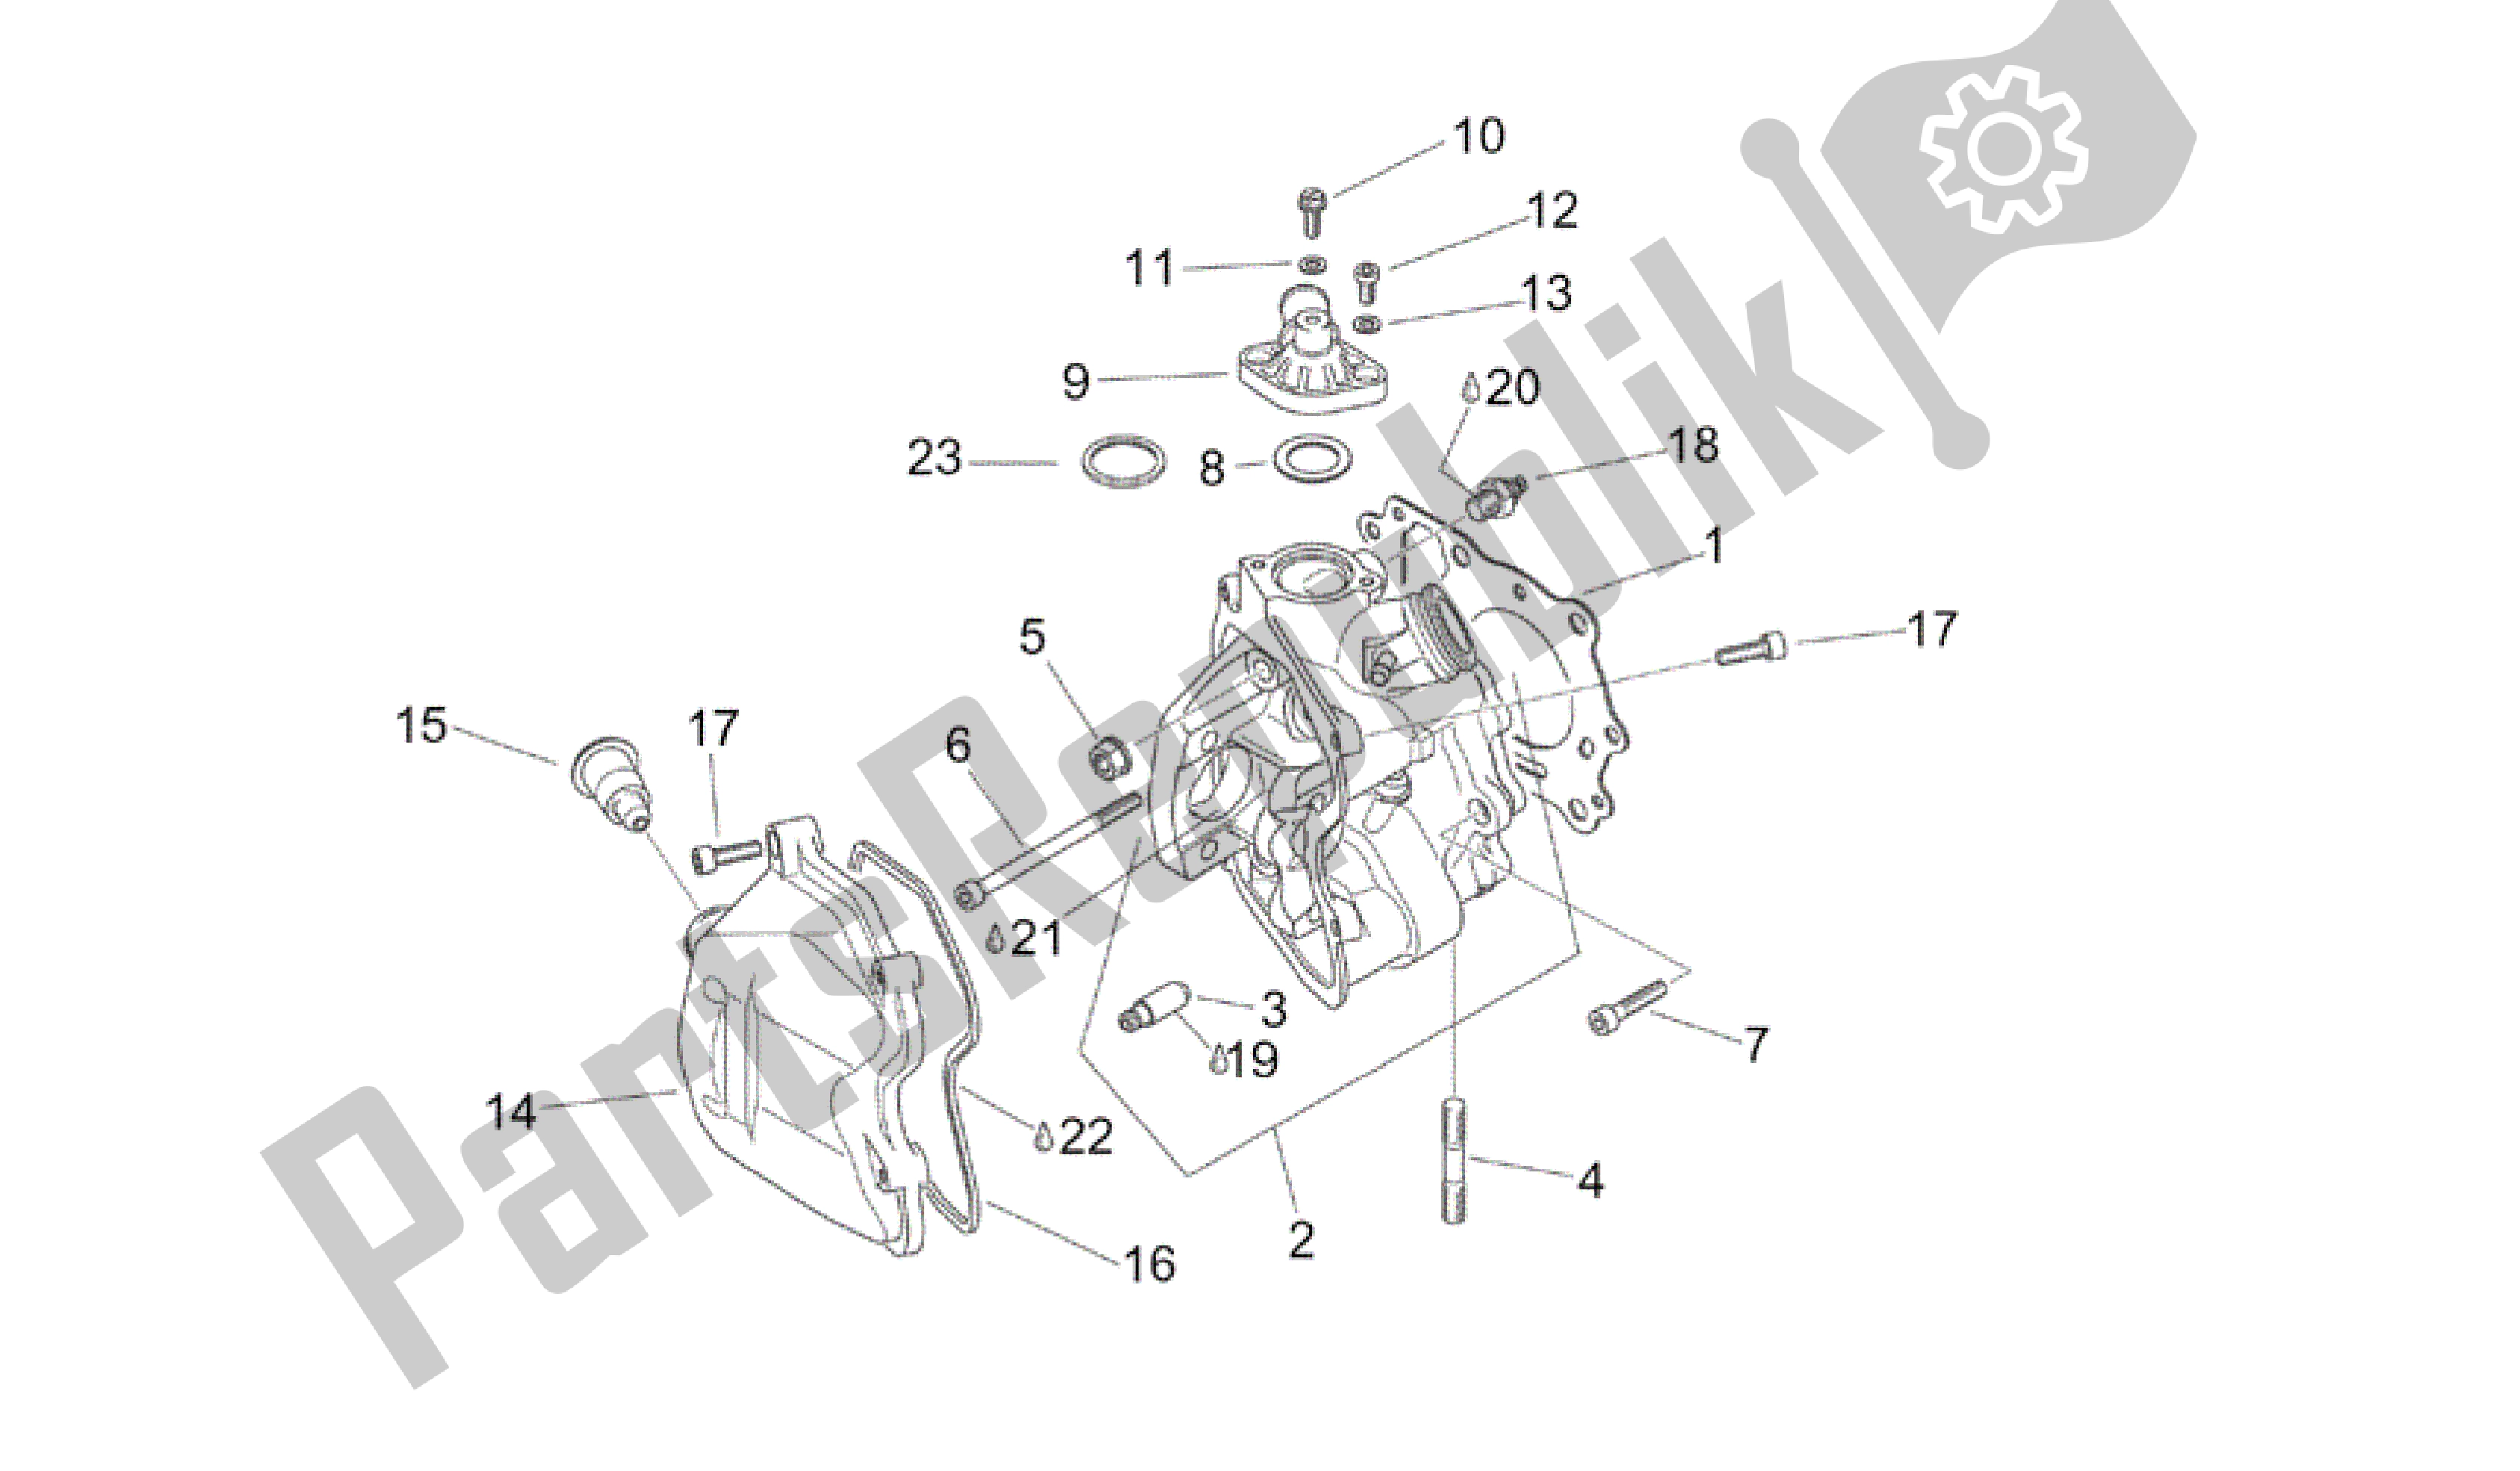 All parts for the Cylinder Head of the Aprilia Scarabeo 150 1999 - 2004